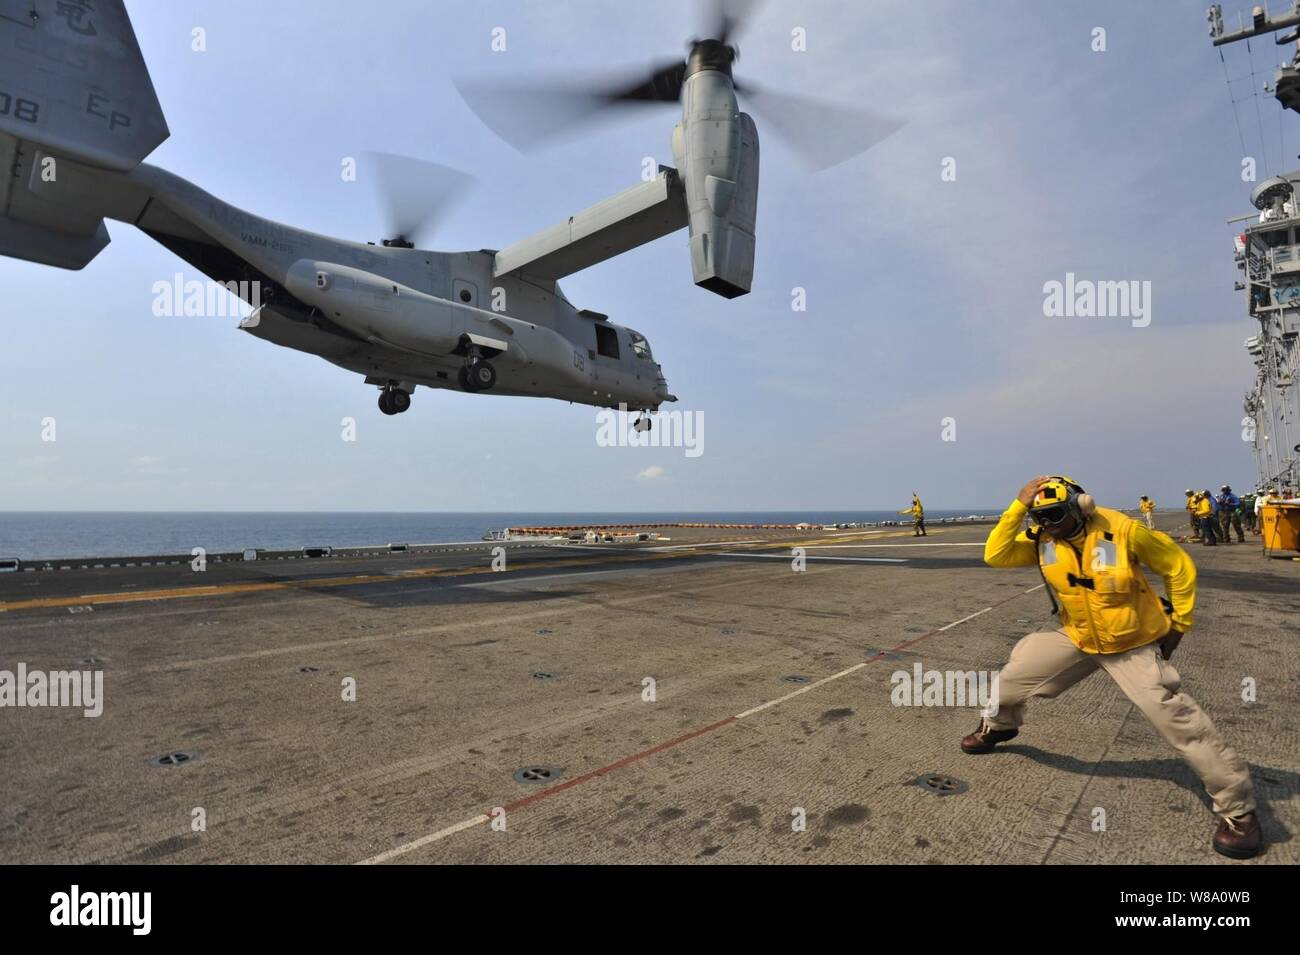 Chief Petty Officer Patrick Dewberry braces himself ¬against the rotor wash of a MV-22 Osprey launching from the deck of the amphibious assault ship USS Bonhomme Richard (LHD 6) in the Gulf of Thailand on Feb. 19, 2013.  The Bonhomme Richard Amphibious Ready Group is deployed in the U.S. 7th Fleet area of responsibility and is taking part in Cobra Gold 2013, a Thai-U.S. co-sponsored multinational joint exercise. Stock Photo